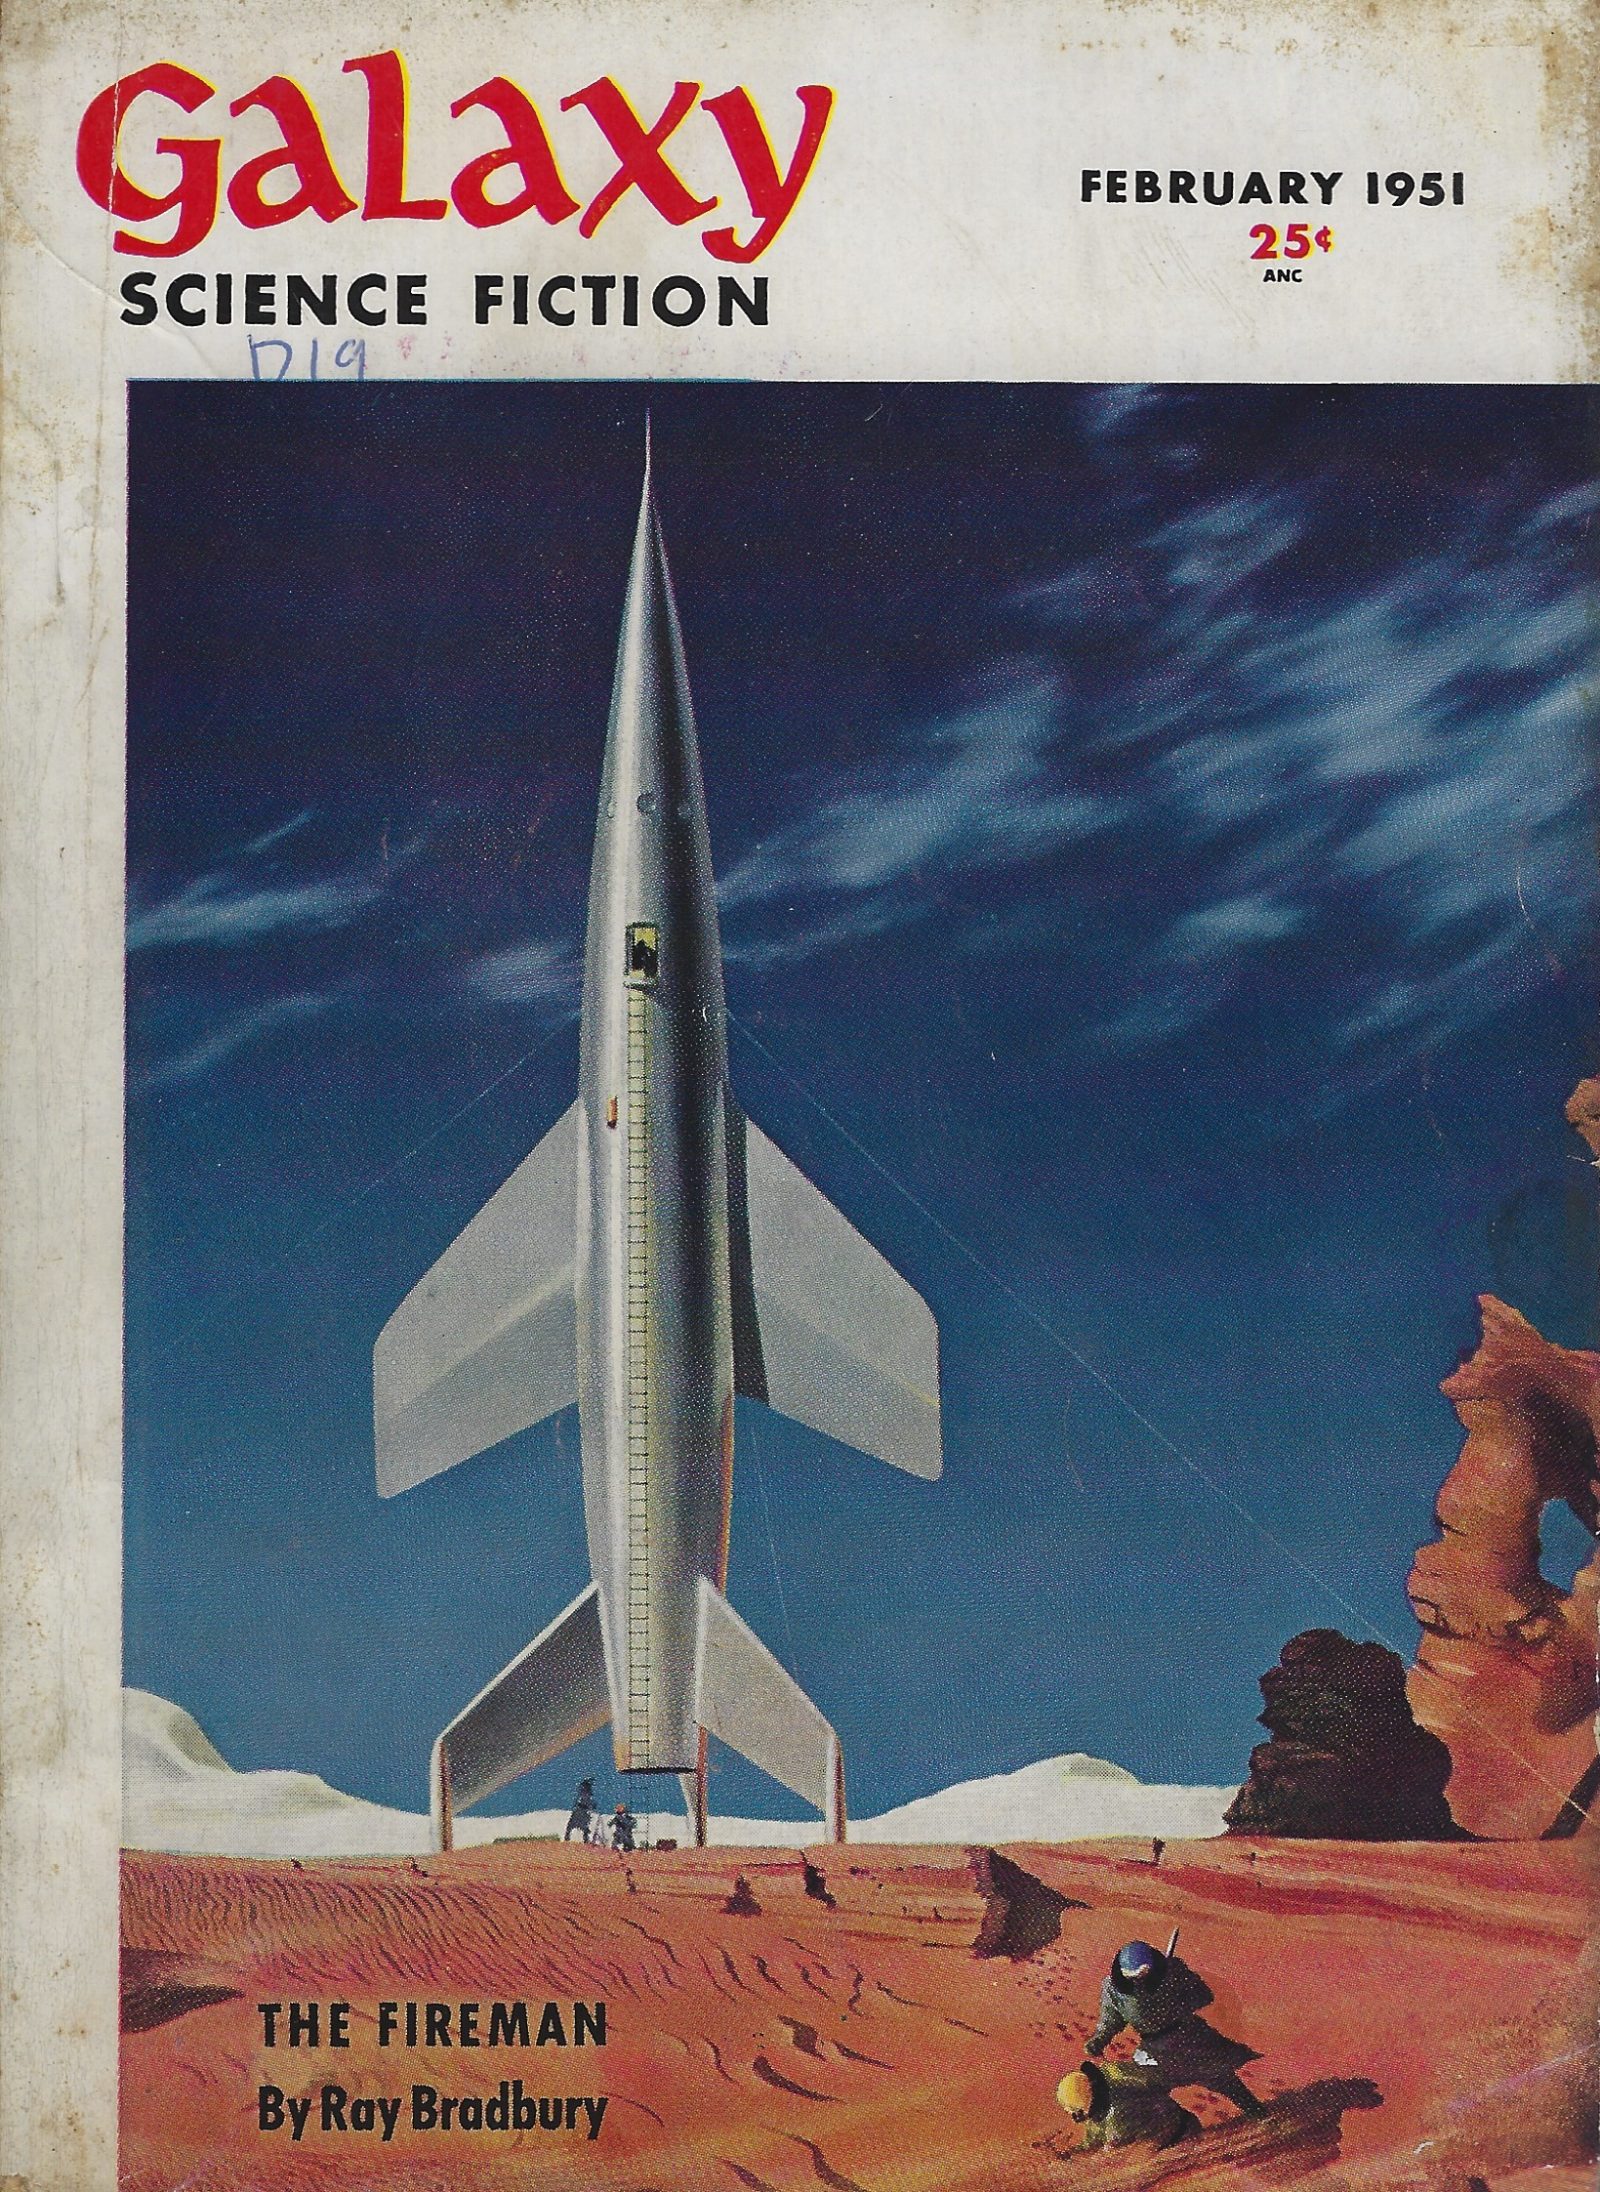 Galaxy Magazine cover from February 1951 featuring a silver rocket on a red landscape